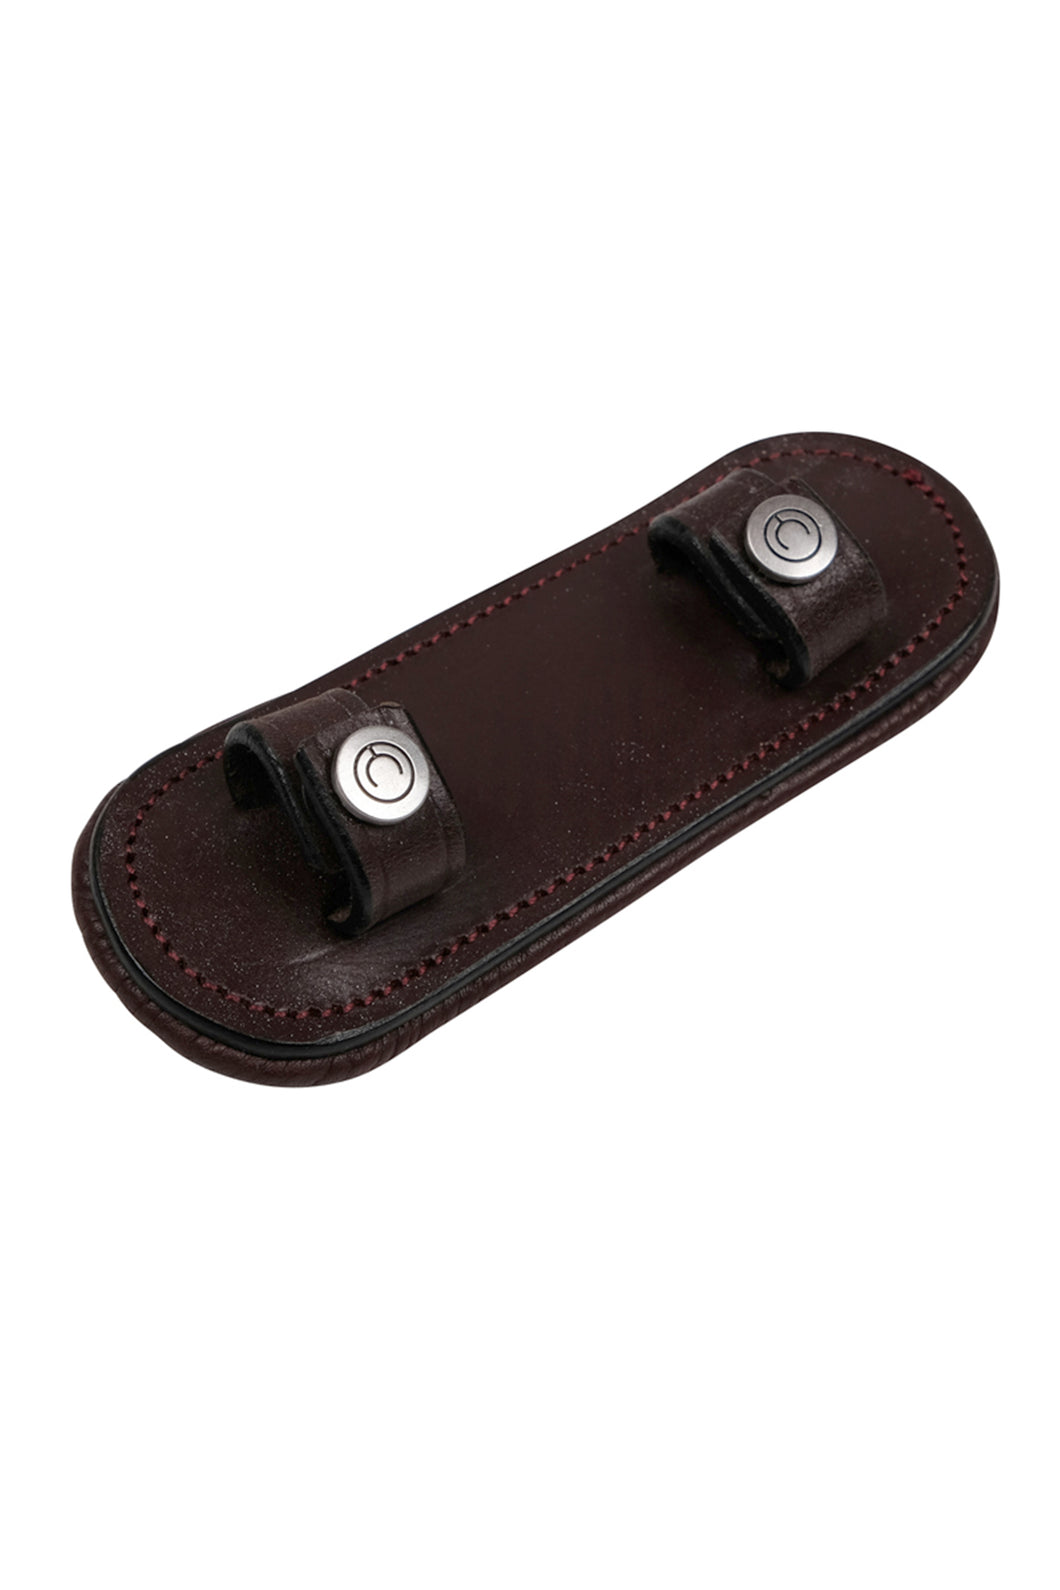 Chin Leather Protector - Brown